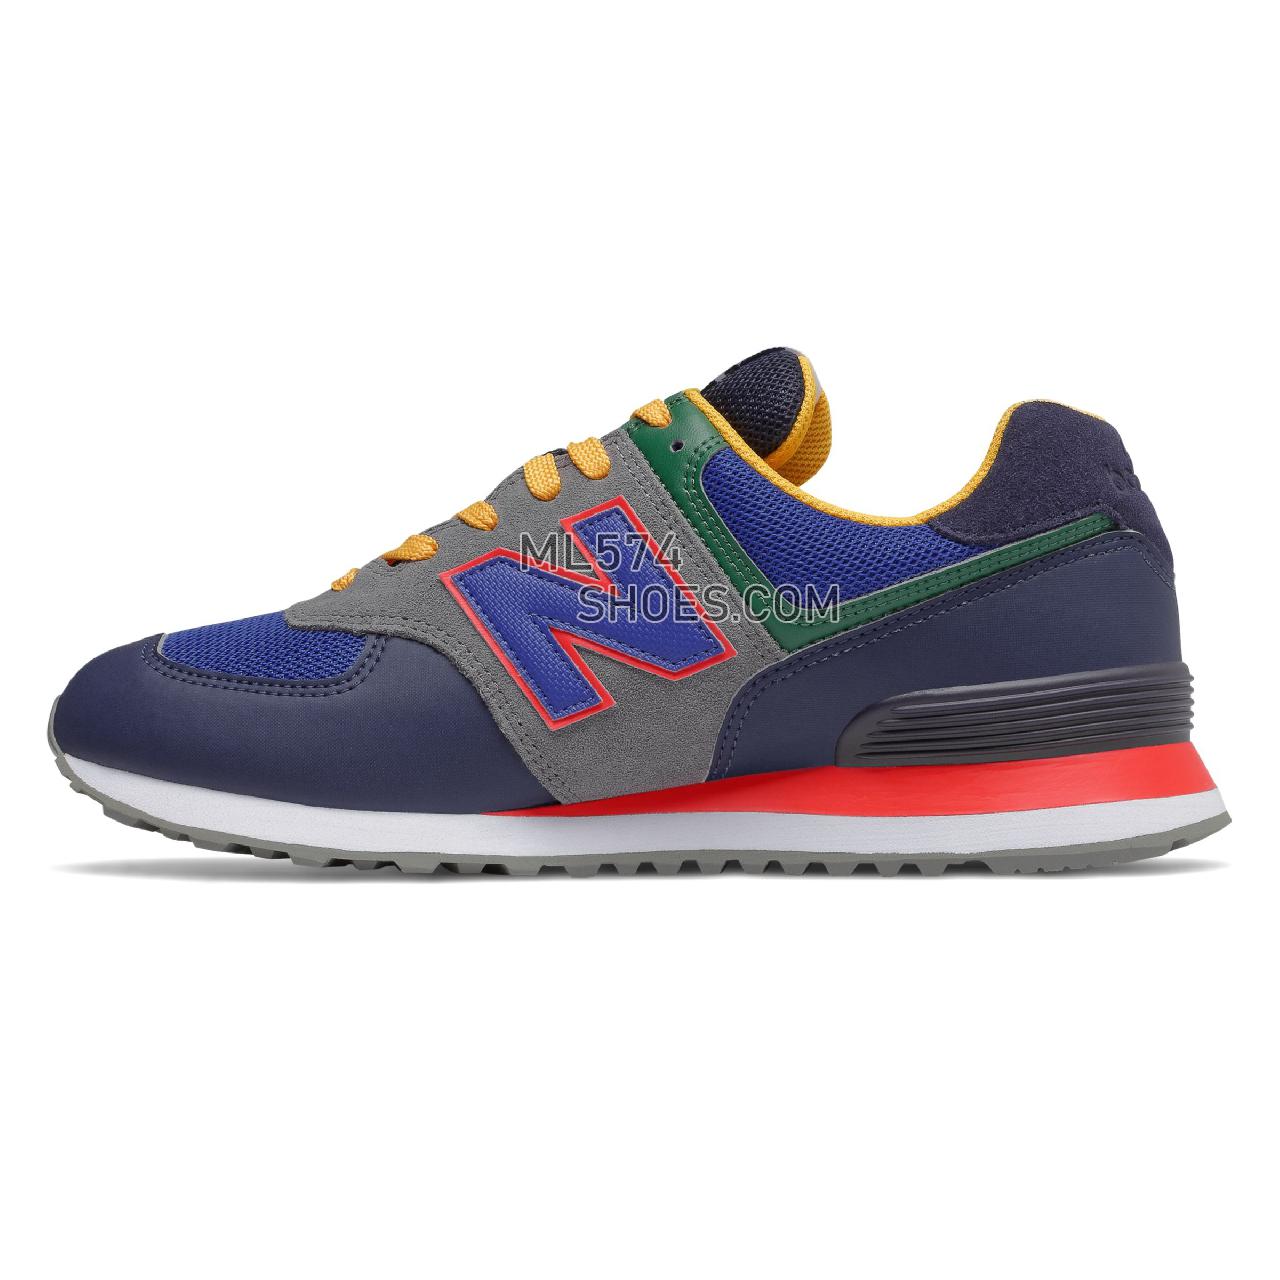 New Balance 574v2 - Men's Classic Sneakers - Pigment with Energy Red - ML574MD2